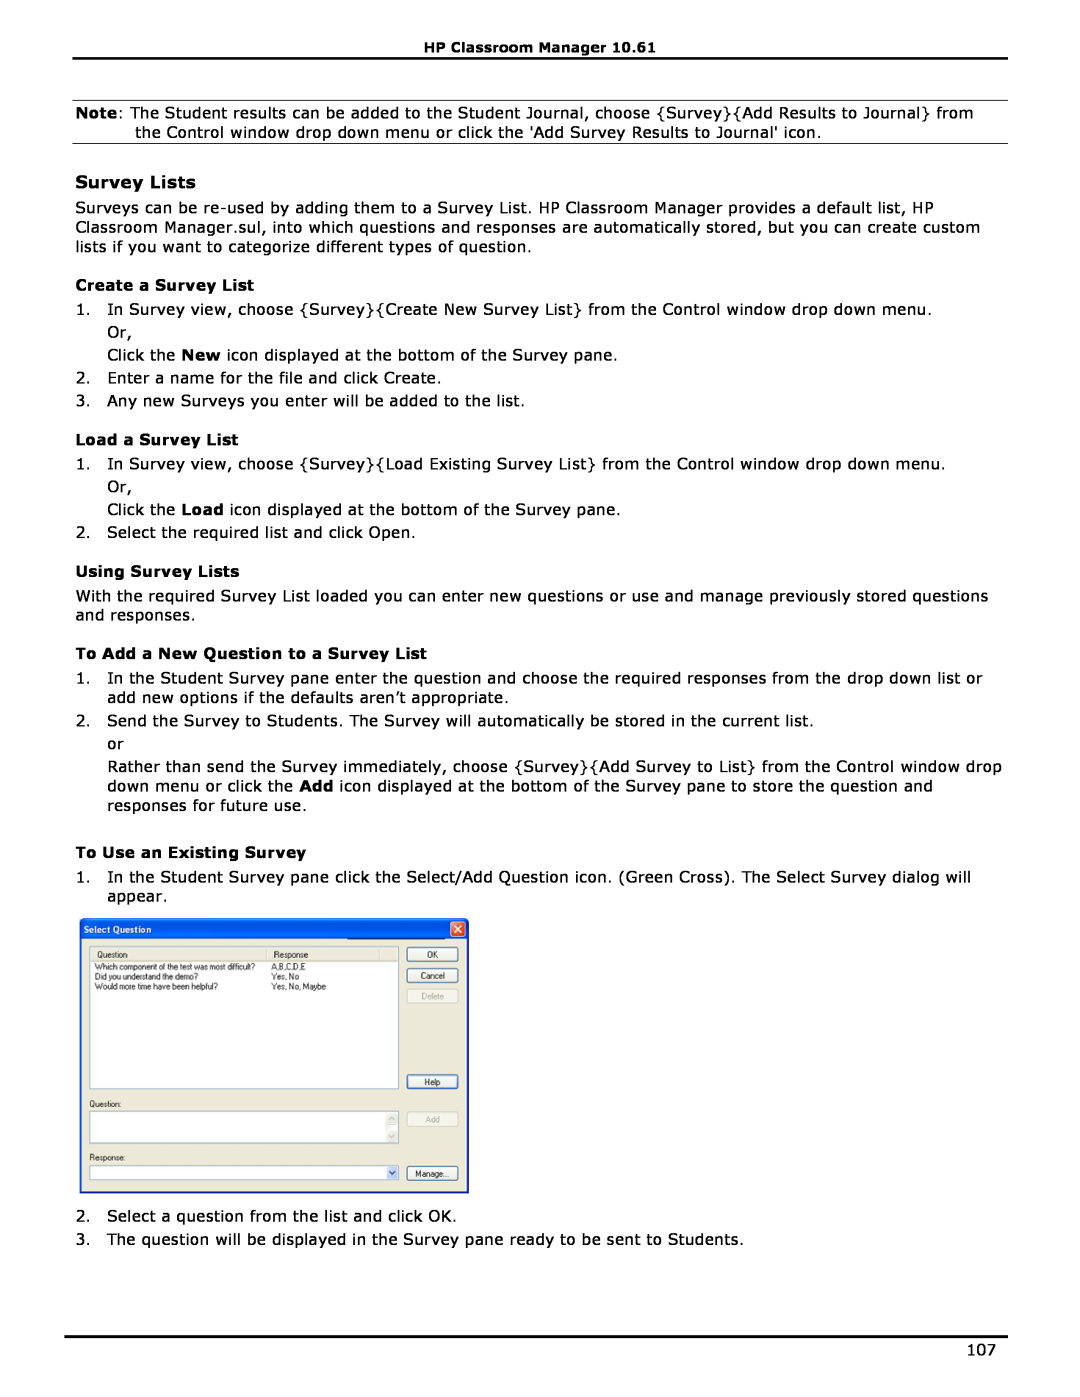 HP Classroom Manager manual Create a Survey List, Load a Survey List, Using Survey Lists, To Use an Existing Survey 